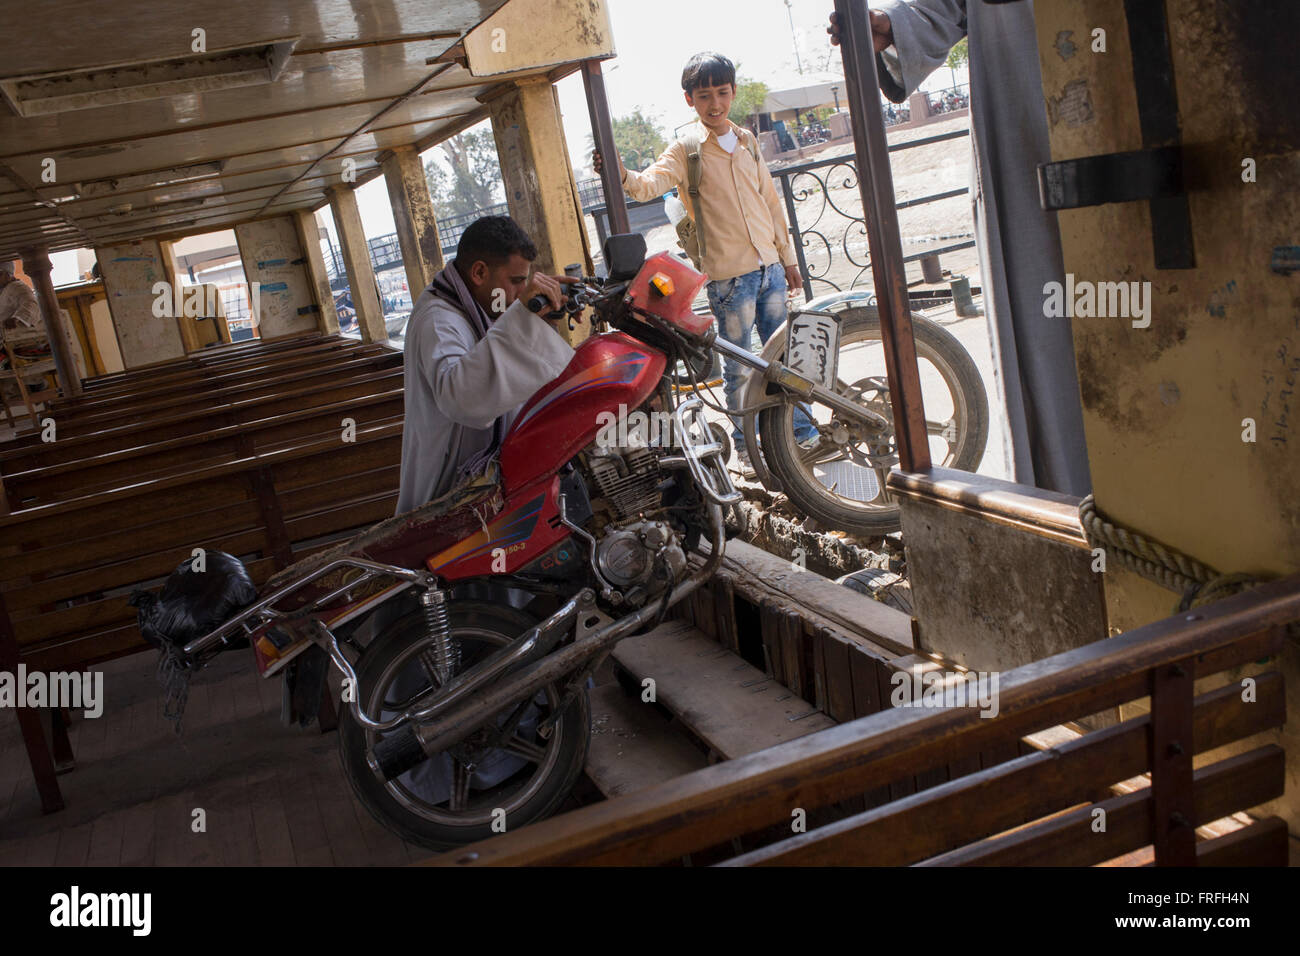 A motorbike is heaved off the state-run ferry across the River Nile at Luxor, Nile Valley, Egypt. Stock Photo